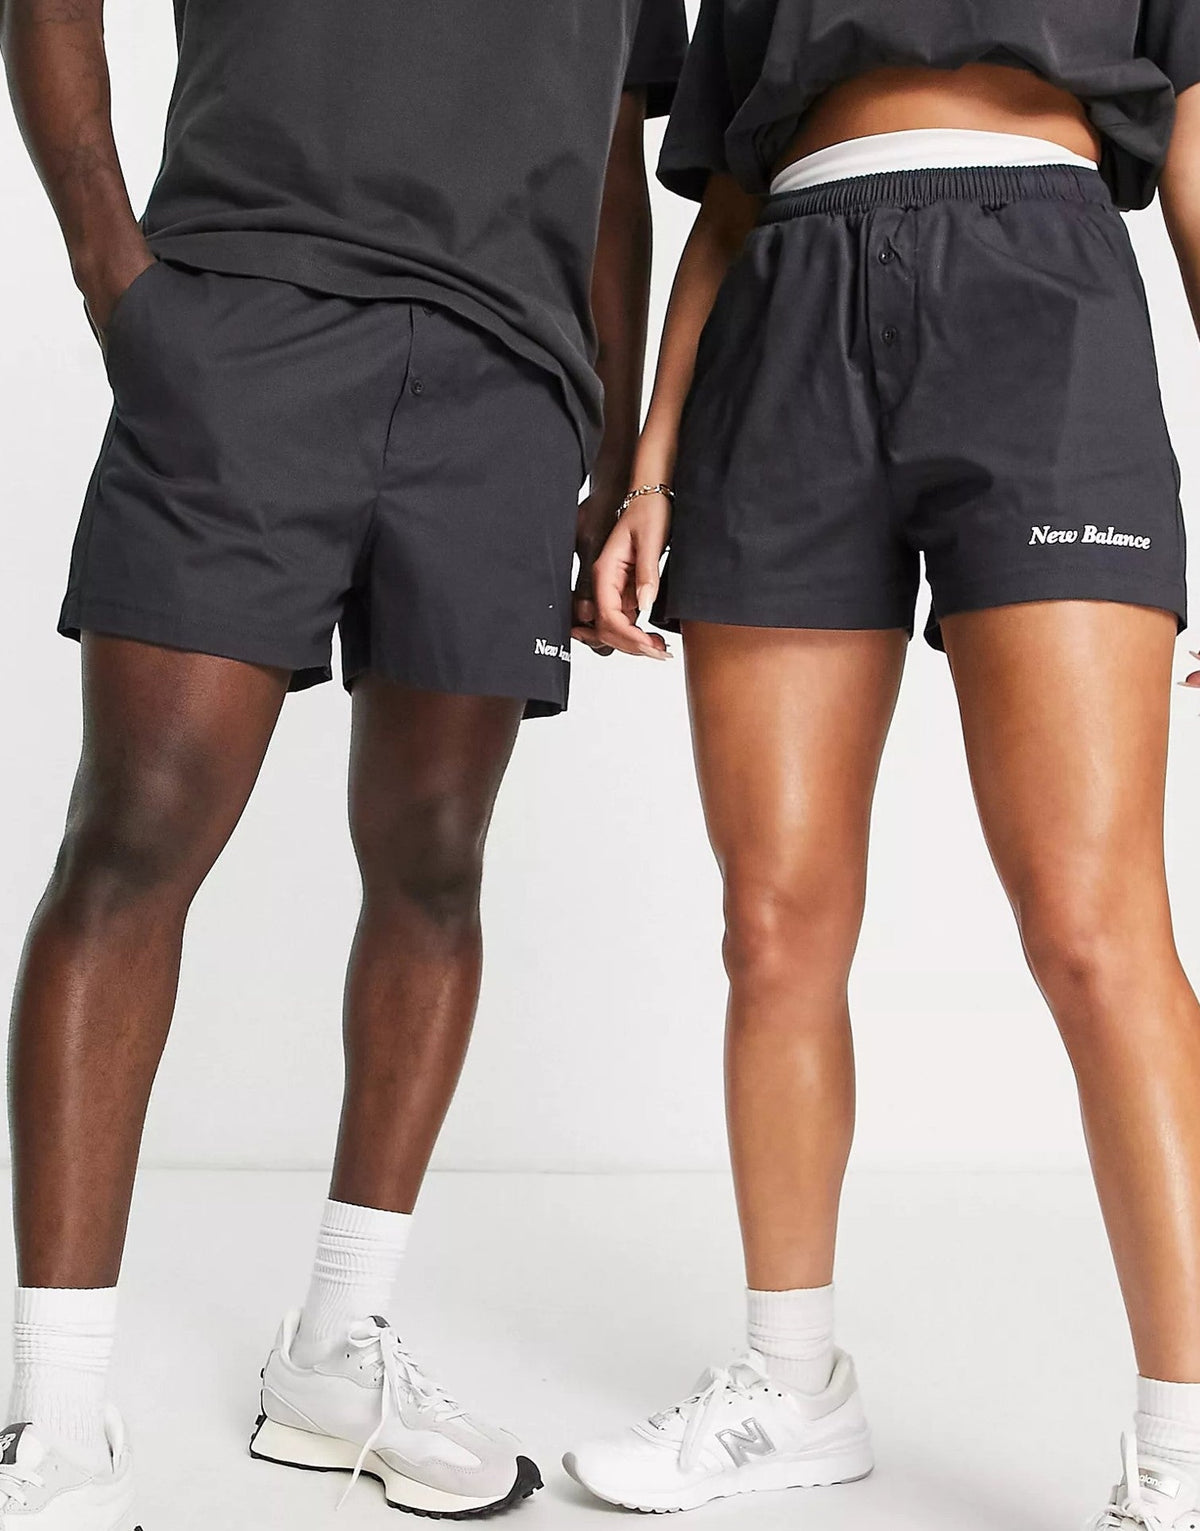 New Balance Mens 'Elevate Yourself' Unisex Shorts in Black